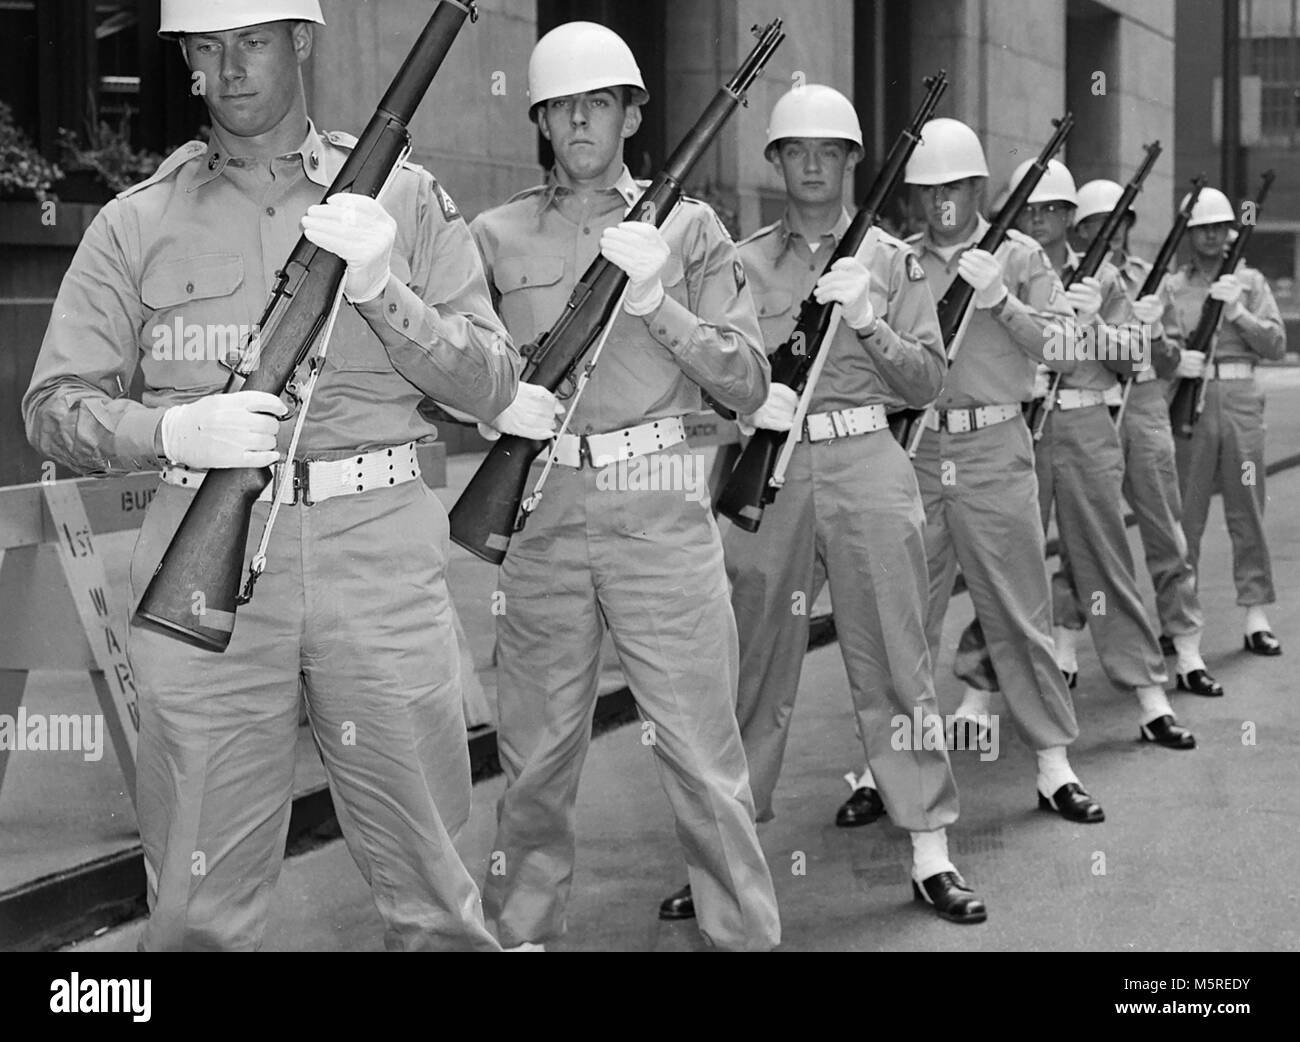 The US Army 3rd division of the 5th Army honor guard in Chicago in 1957. Stock Photo